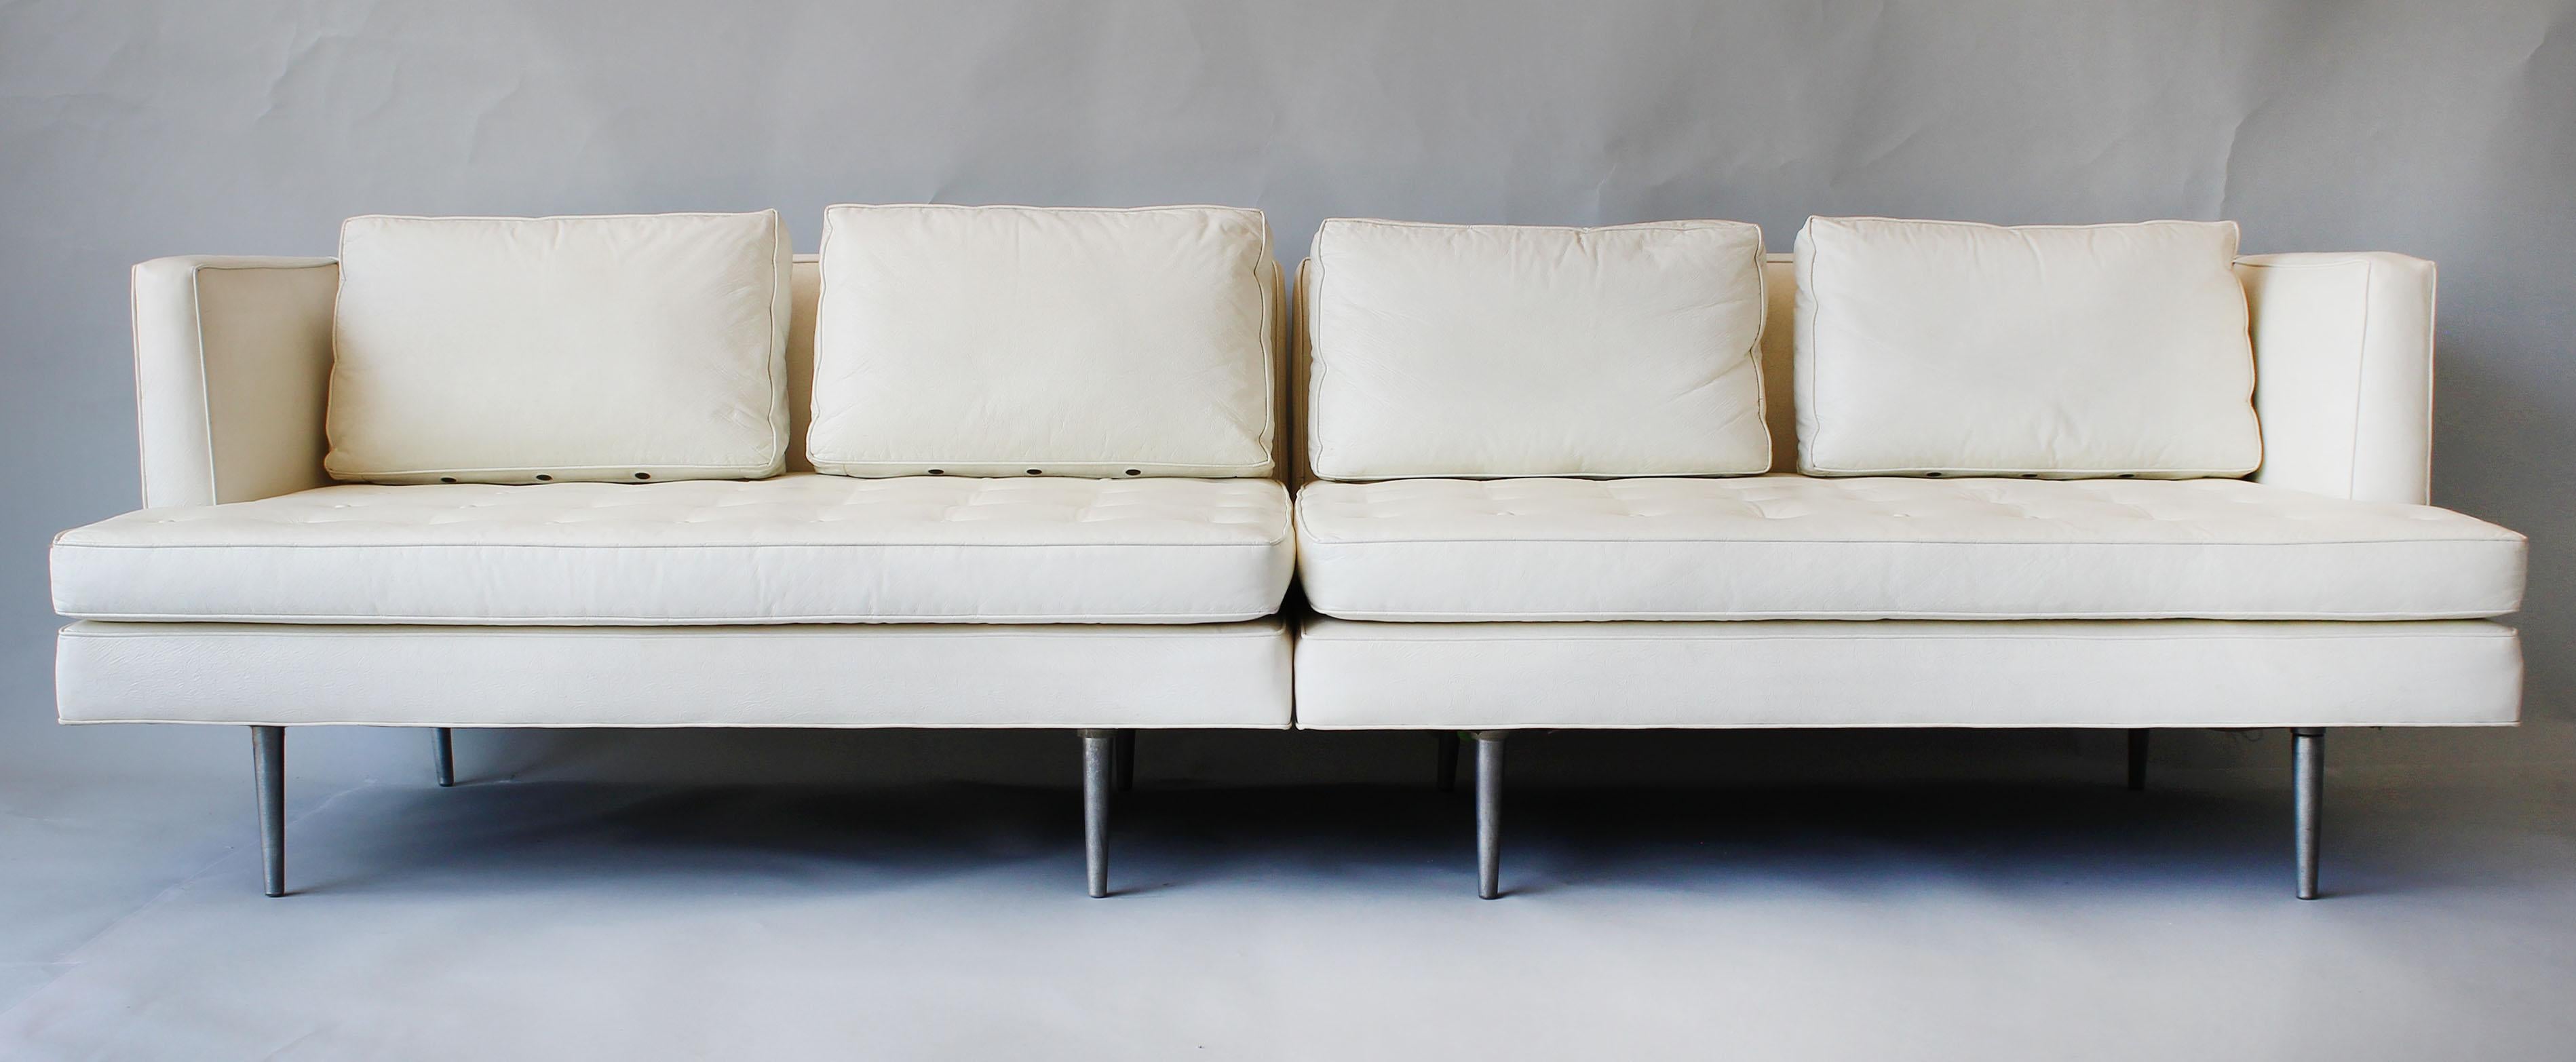 A two-piece sectional sofa, model number 4908, designed by Edward Wormley for Dunbar Furniture. This low profile sofa is one of the most comfortable modern pieces you will ever sit on. Can be used as shown or as settees opposing one another or as a